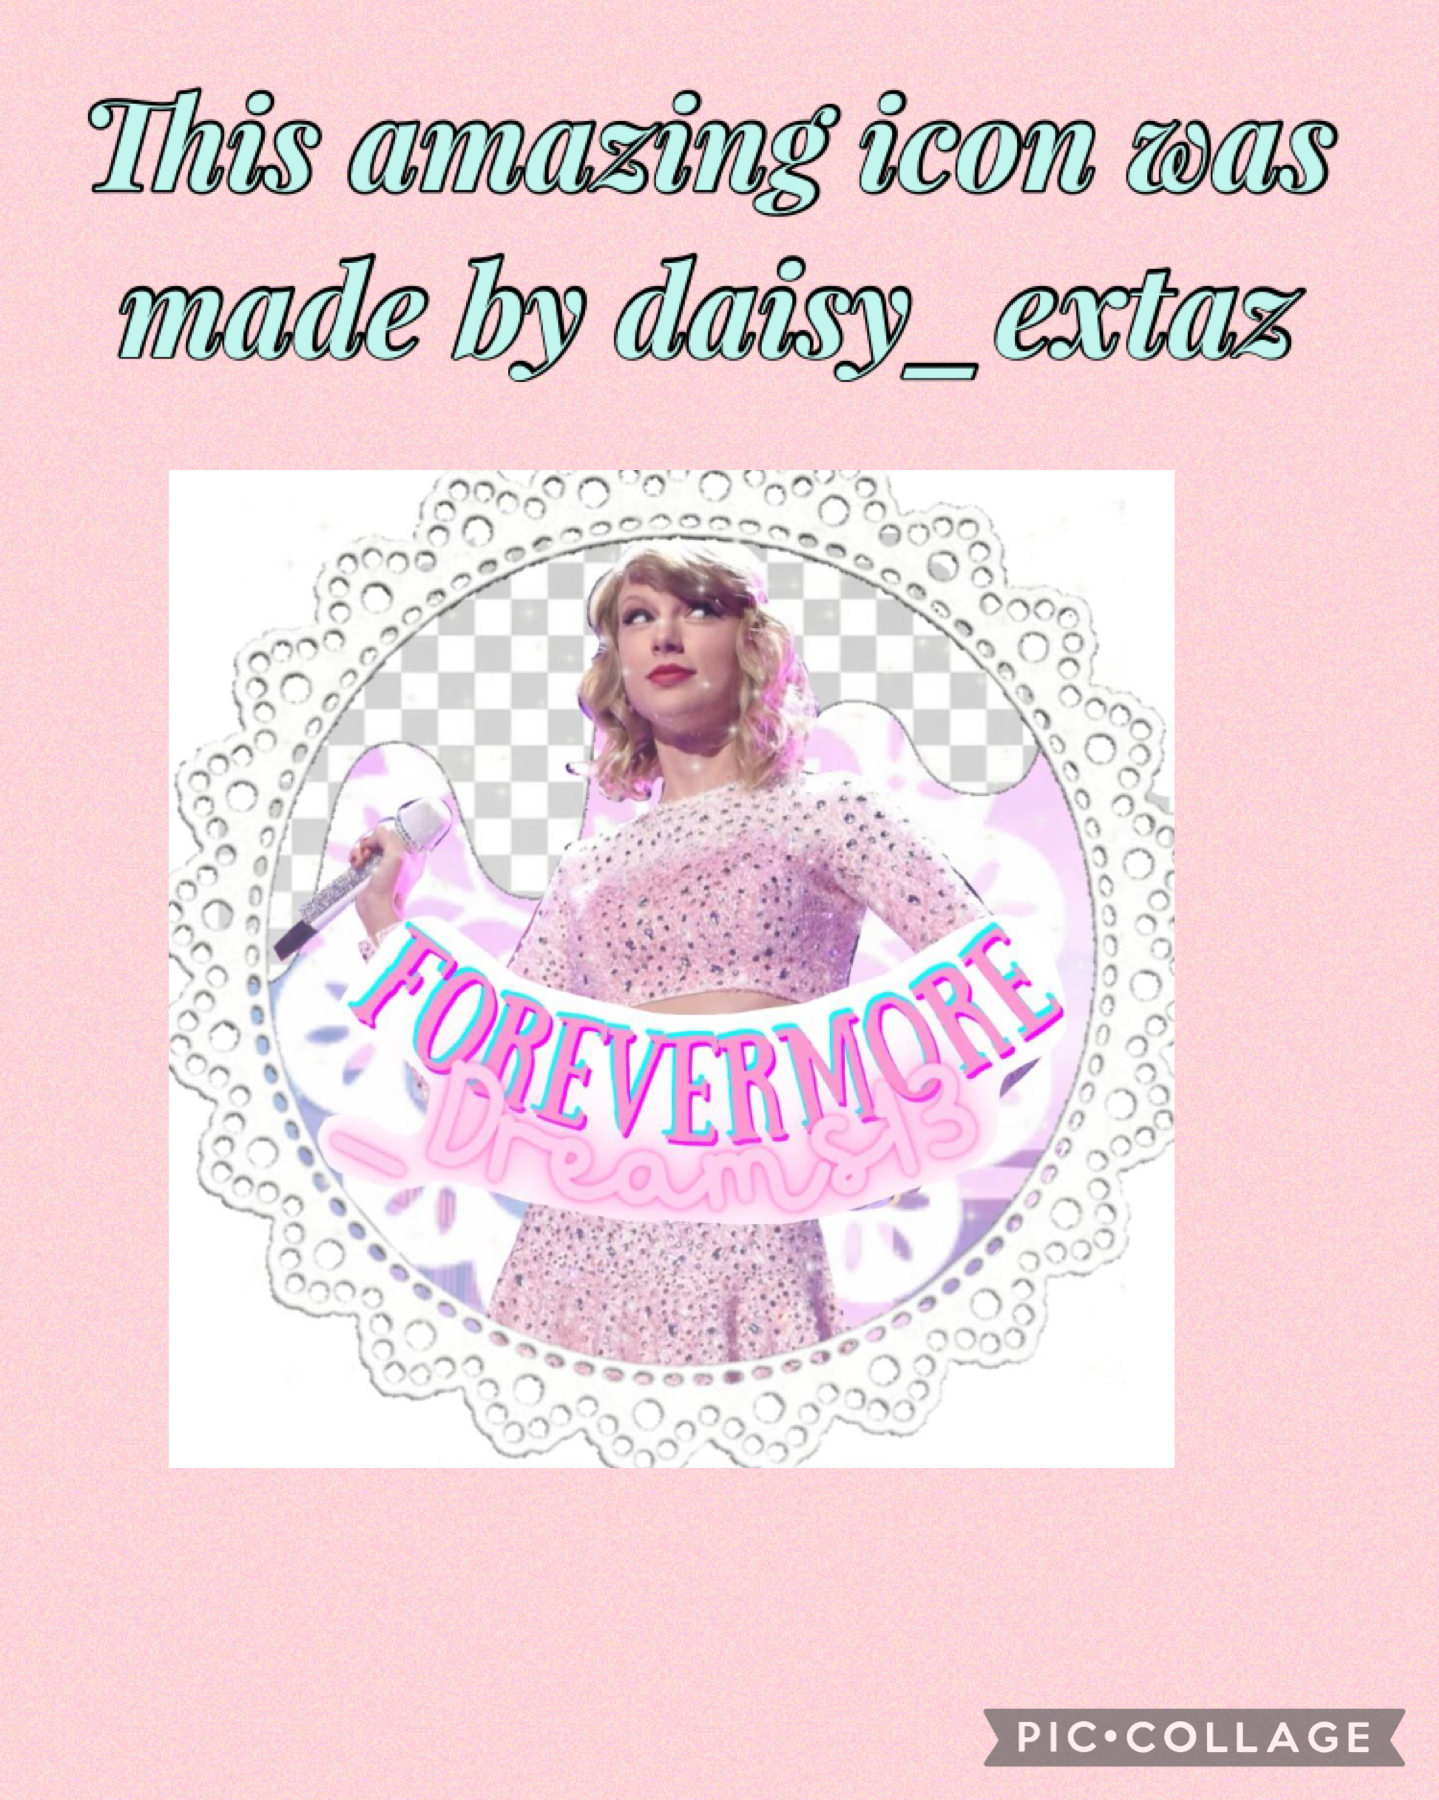 10.9.23 This amazing icon was made by daisy_extraz